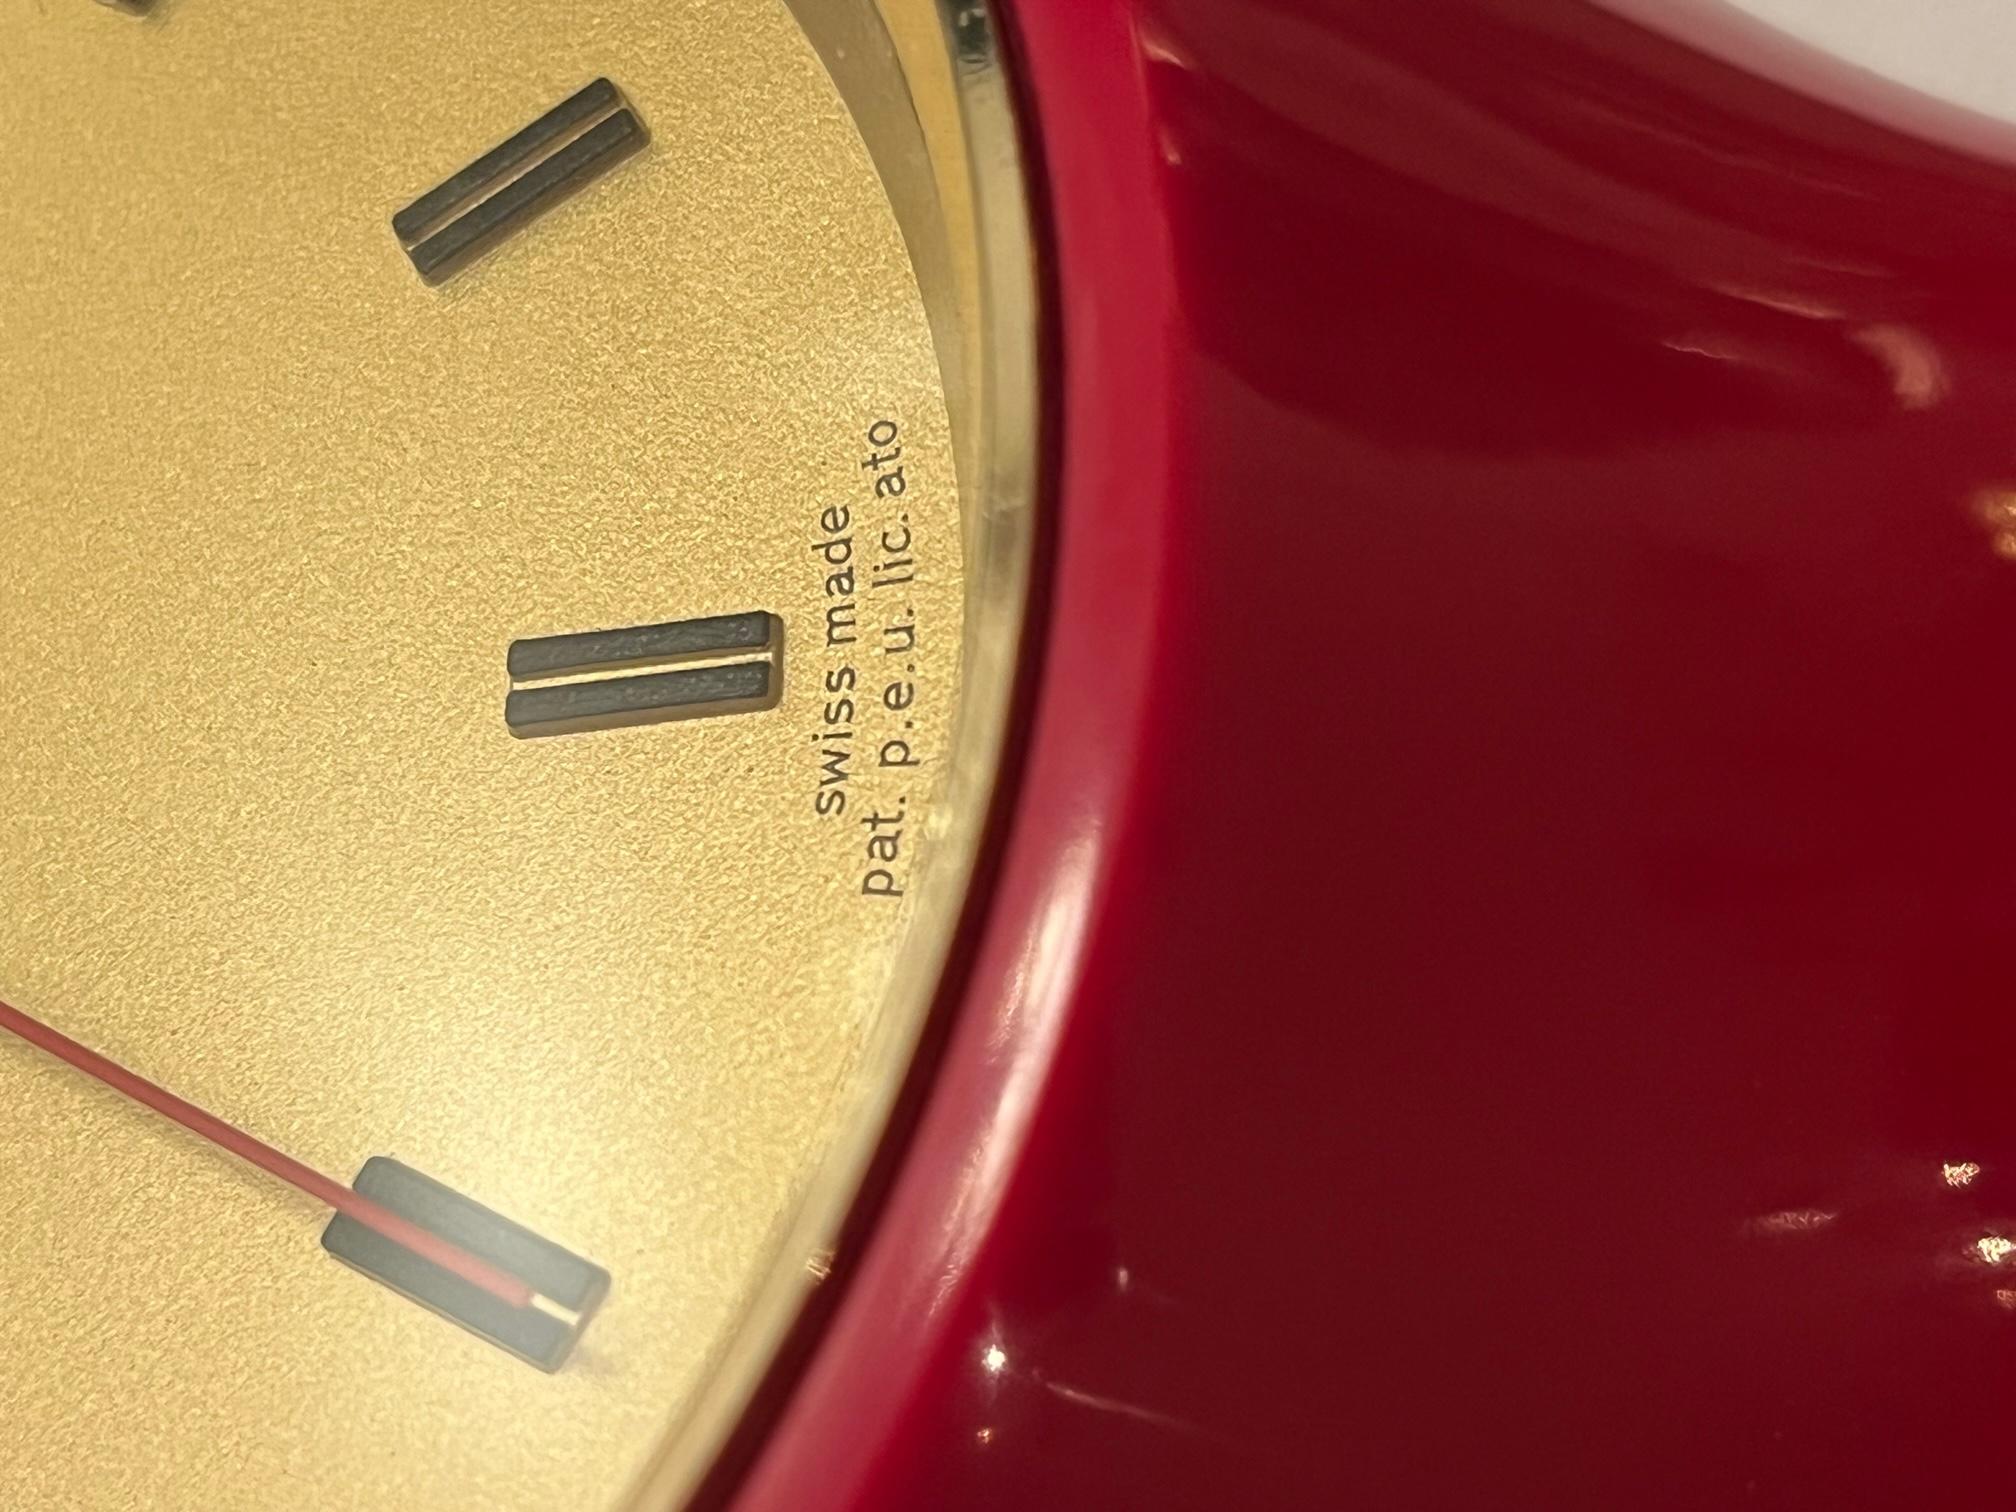 Mid-20th Century Secticon Table Clock Mod. T1 by Angelo Mangiarotti, Swiss Made, 1956